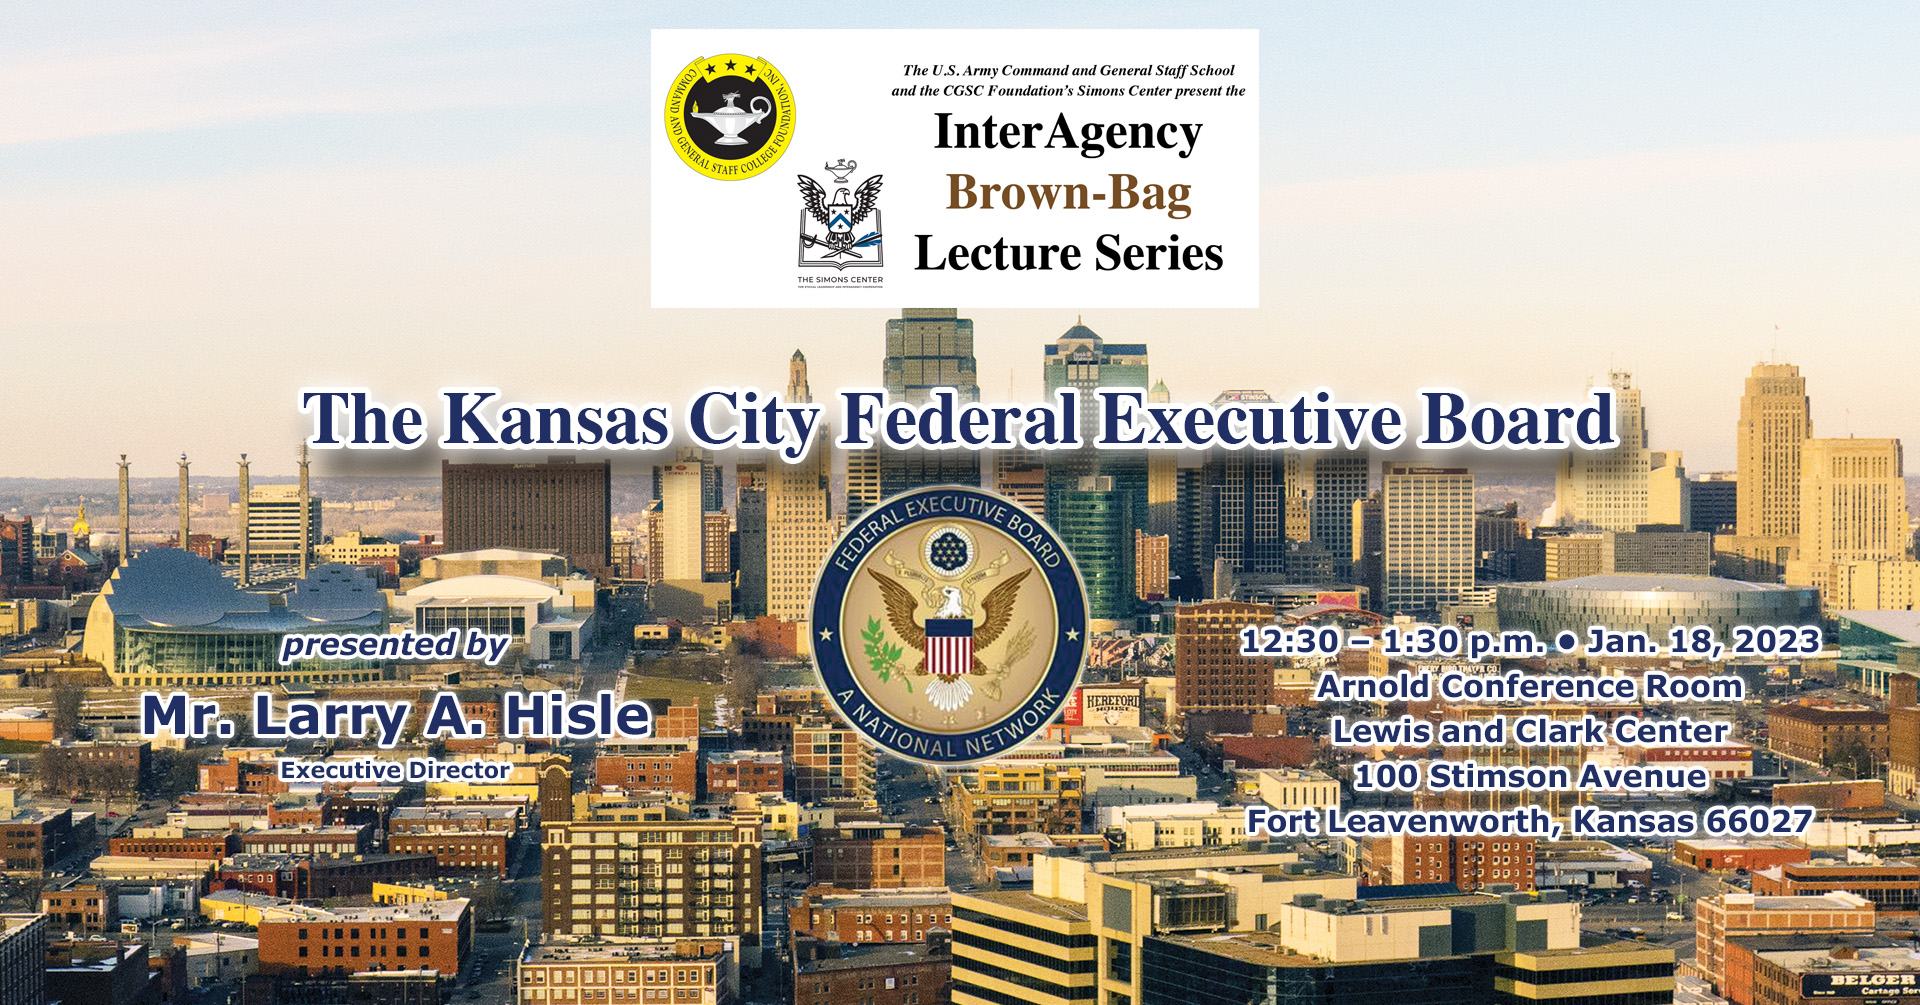 Composite image with the IABBLS logo over a photo of the Kansas City skyline. Under the IABBLS logo is the seal of the Federal Executive Board (FEB) and the date/time/location of the lecture on Jan. 18, 2023.